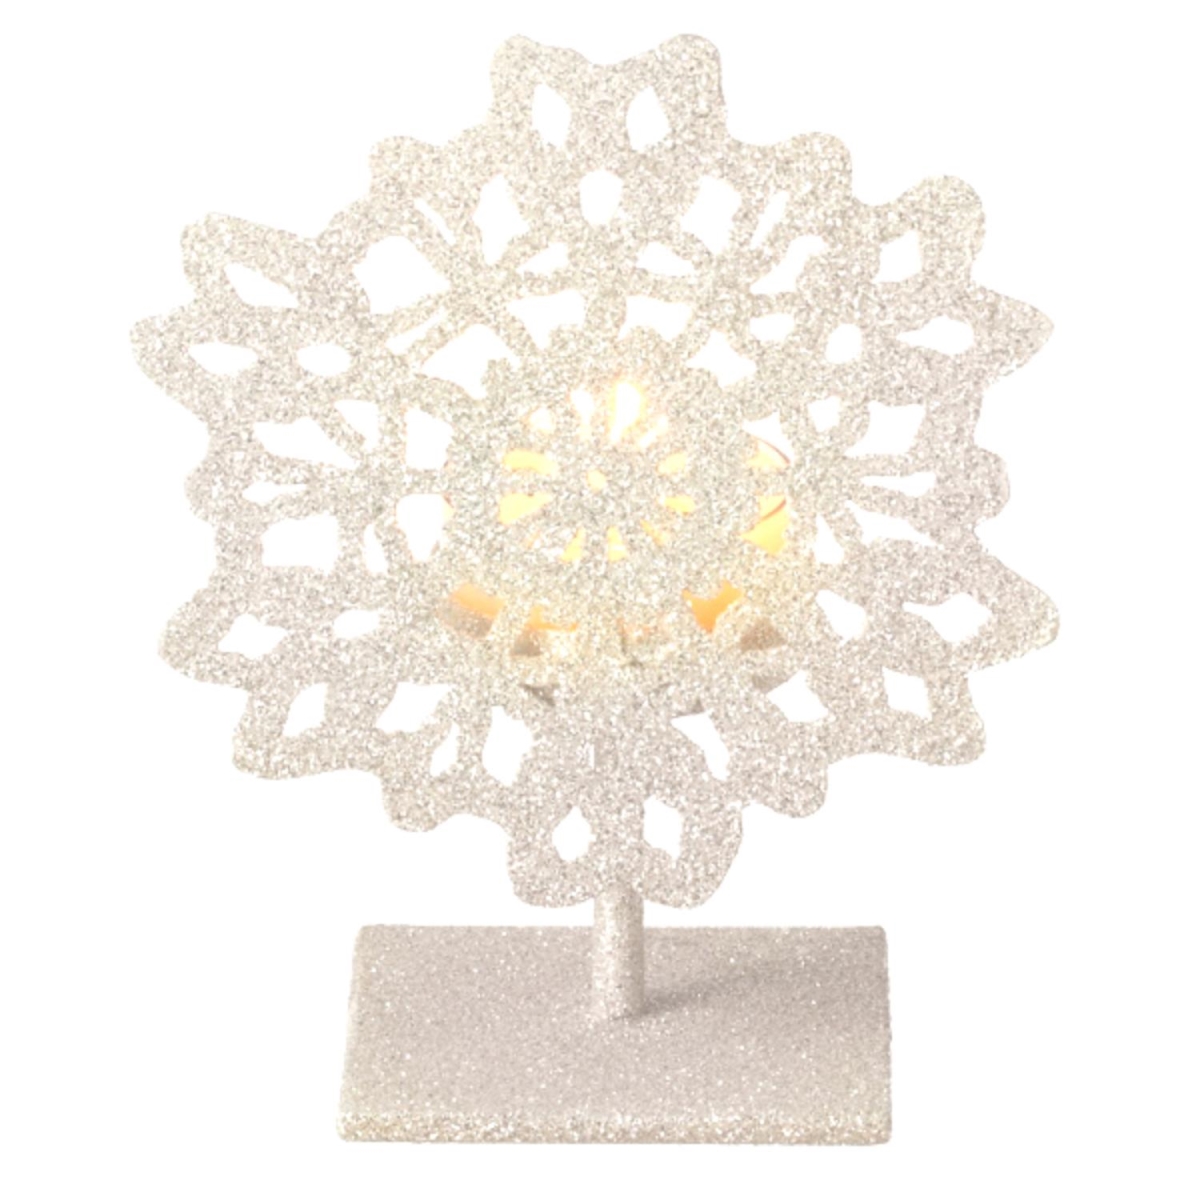 31088656 5 In. Silent Luxury Off-white Glitter Drenched Snowflake Tea Light Candle Holder